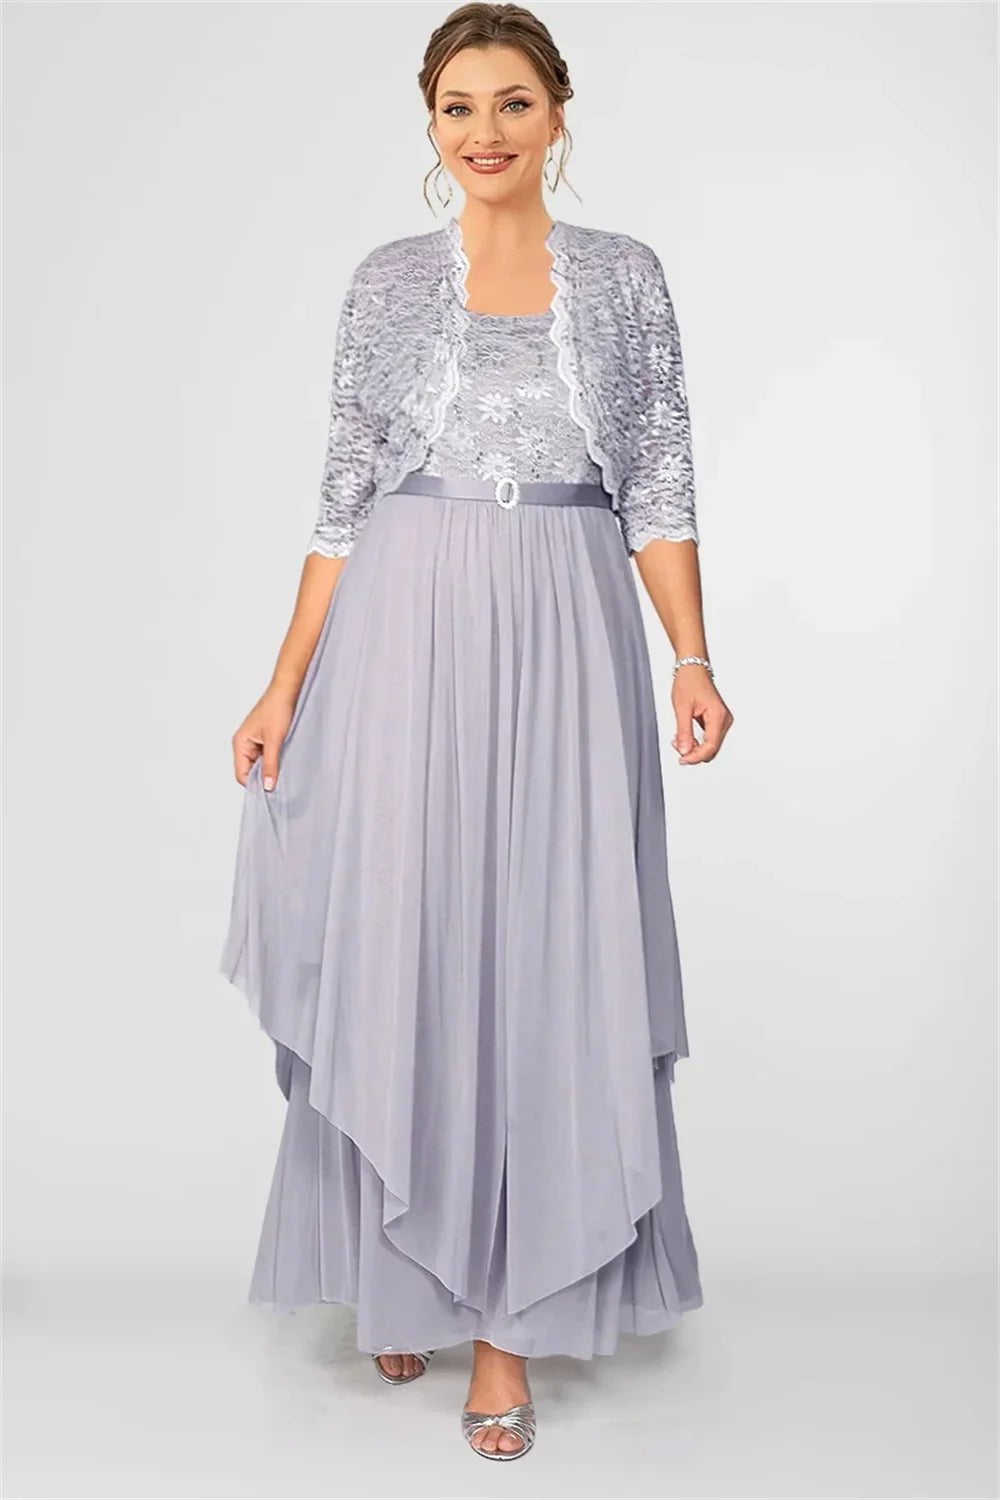 Cap Point Grey / L Francine Pleated Lace Cardigans and Chiffon Layer Dress with Belt